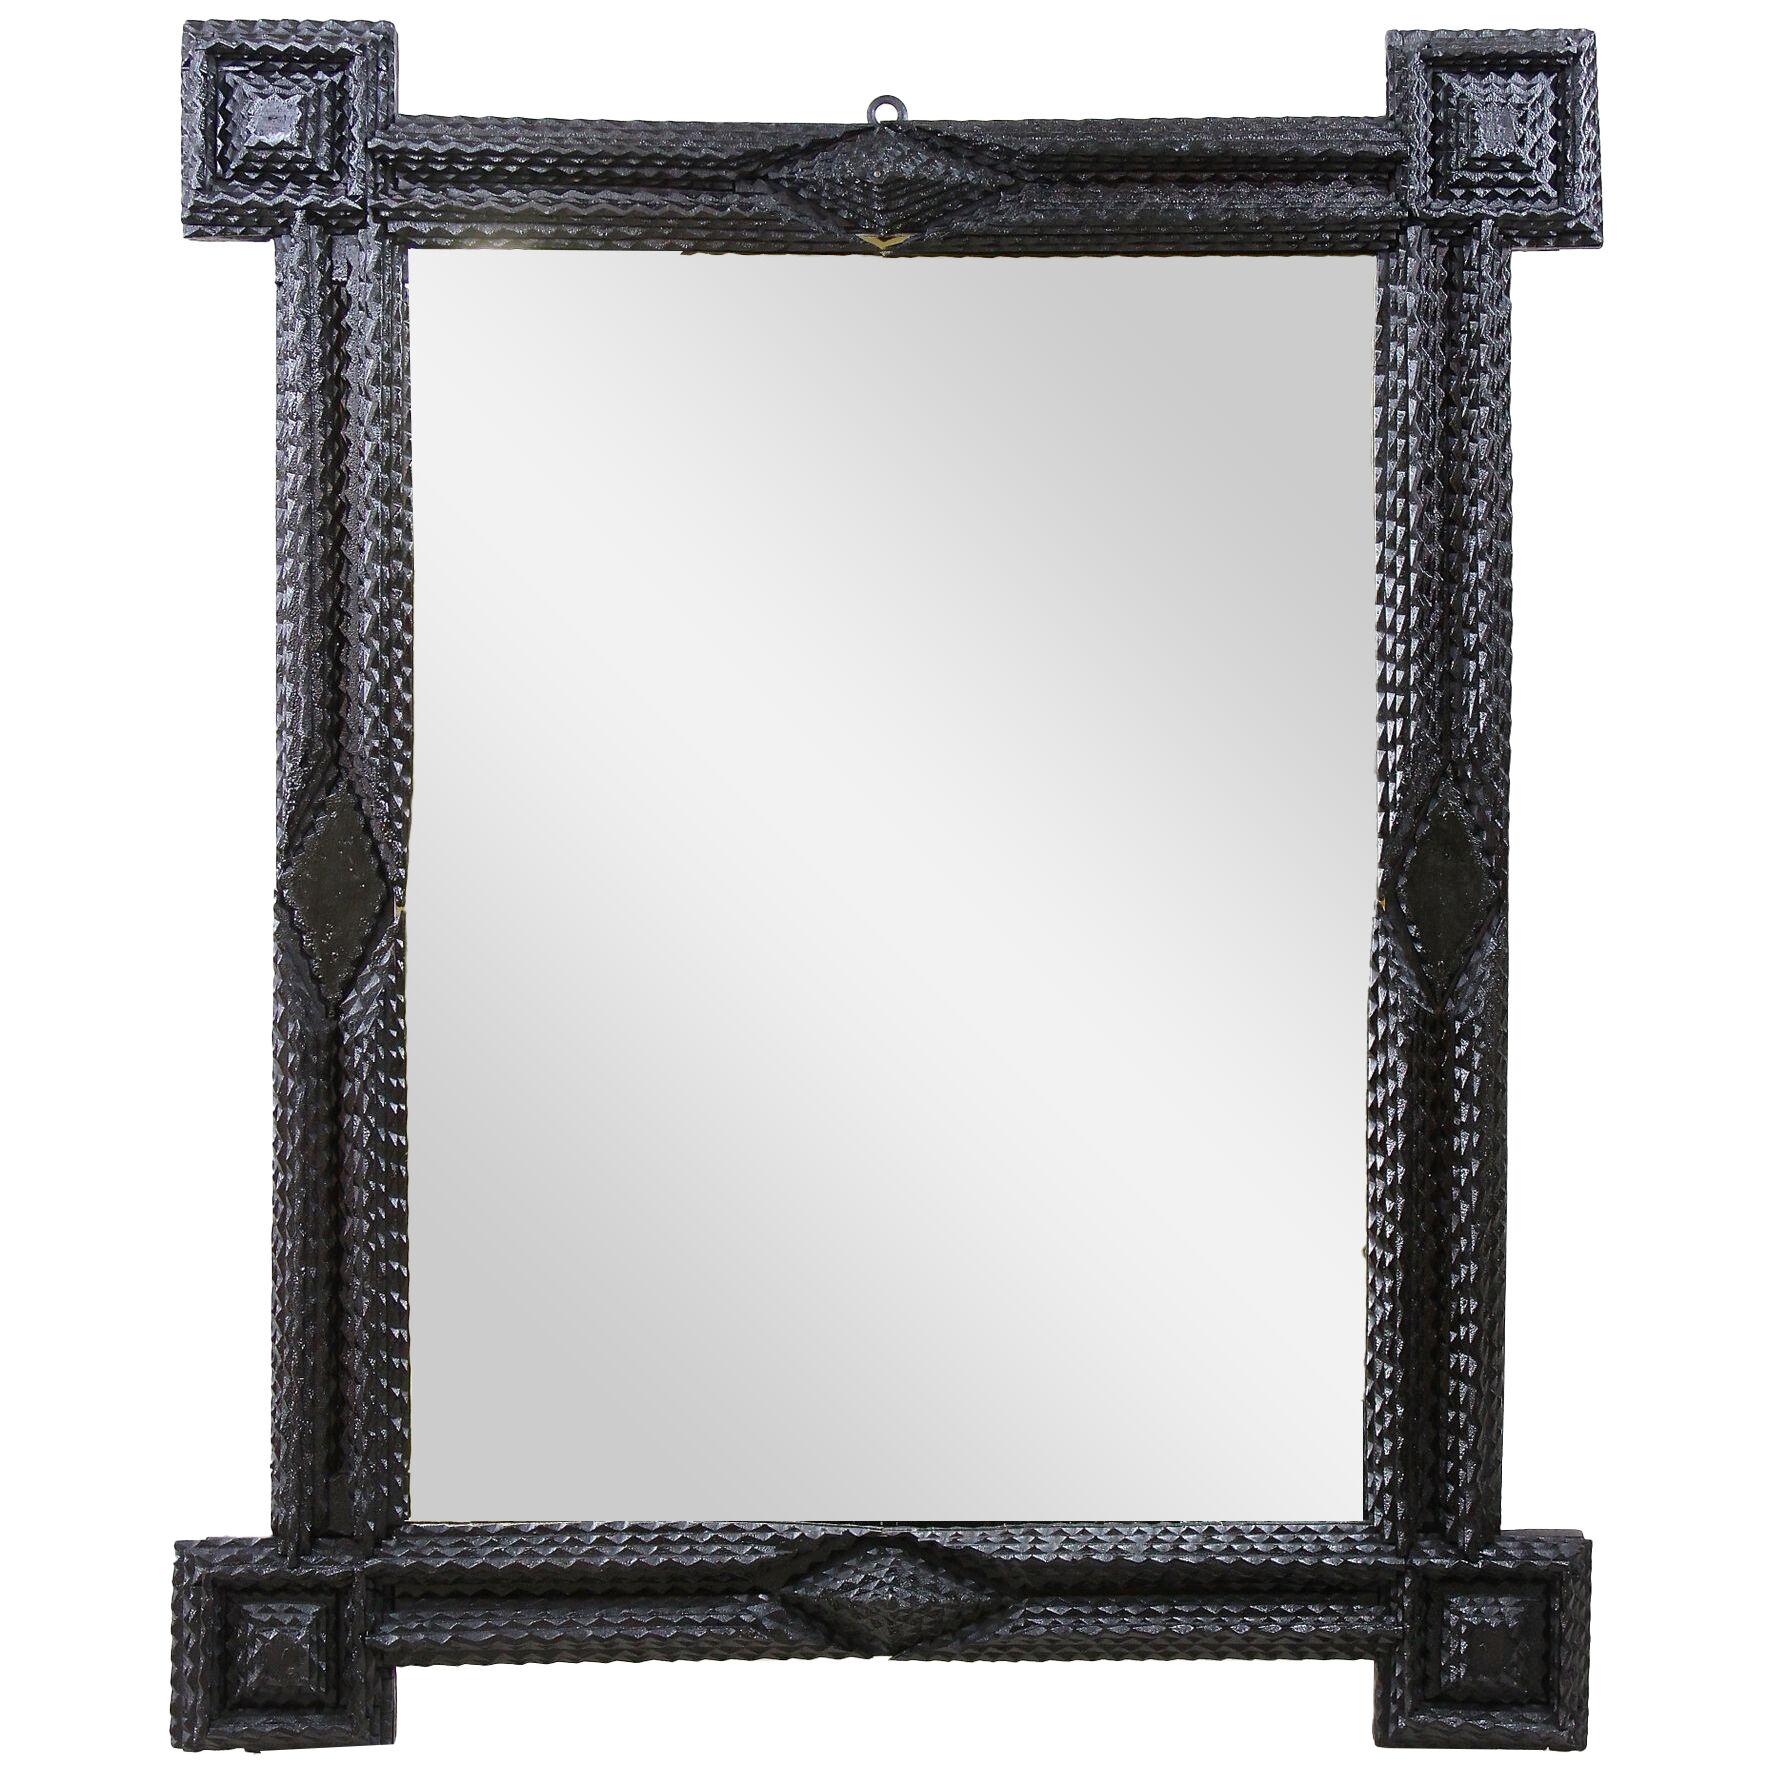 Tramp Art Rustic Wall Mirror With Extended Corners Handcarved, Austria ca. 1860